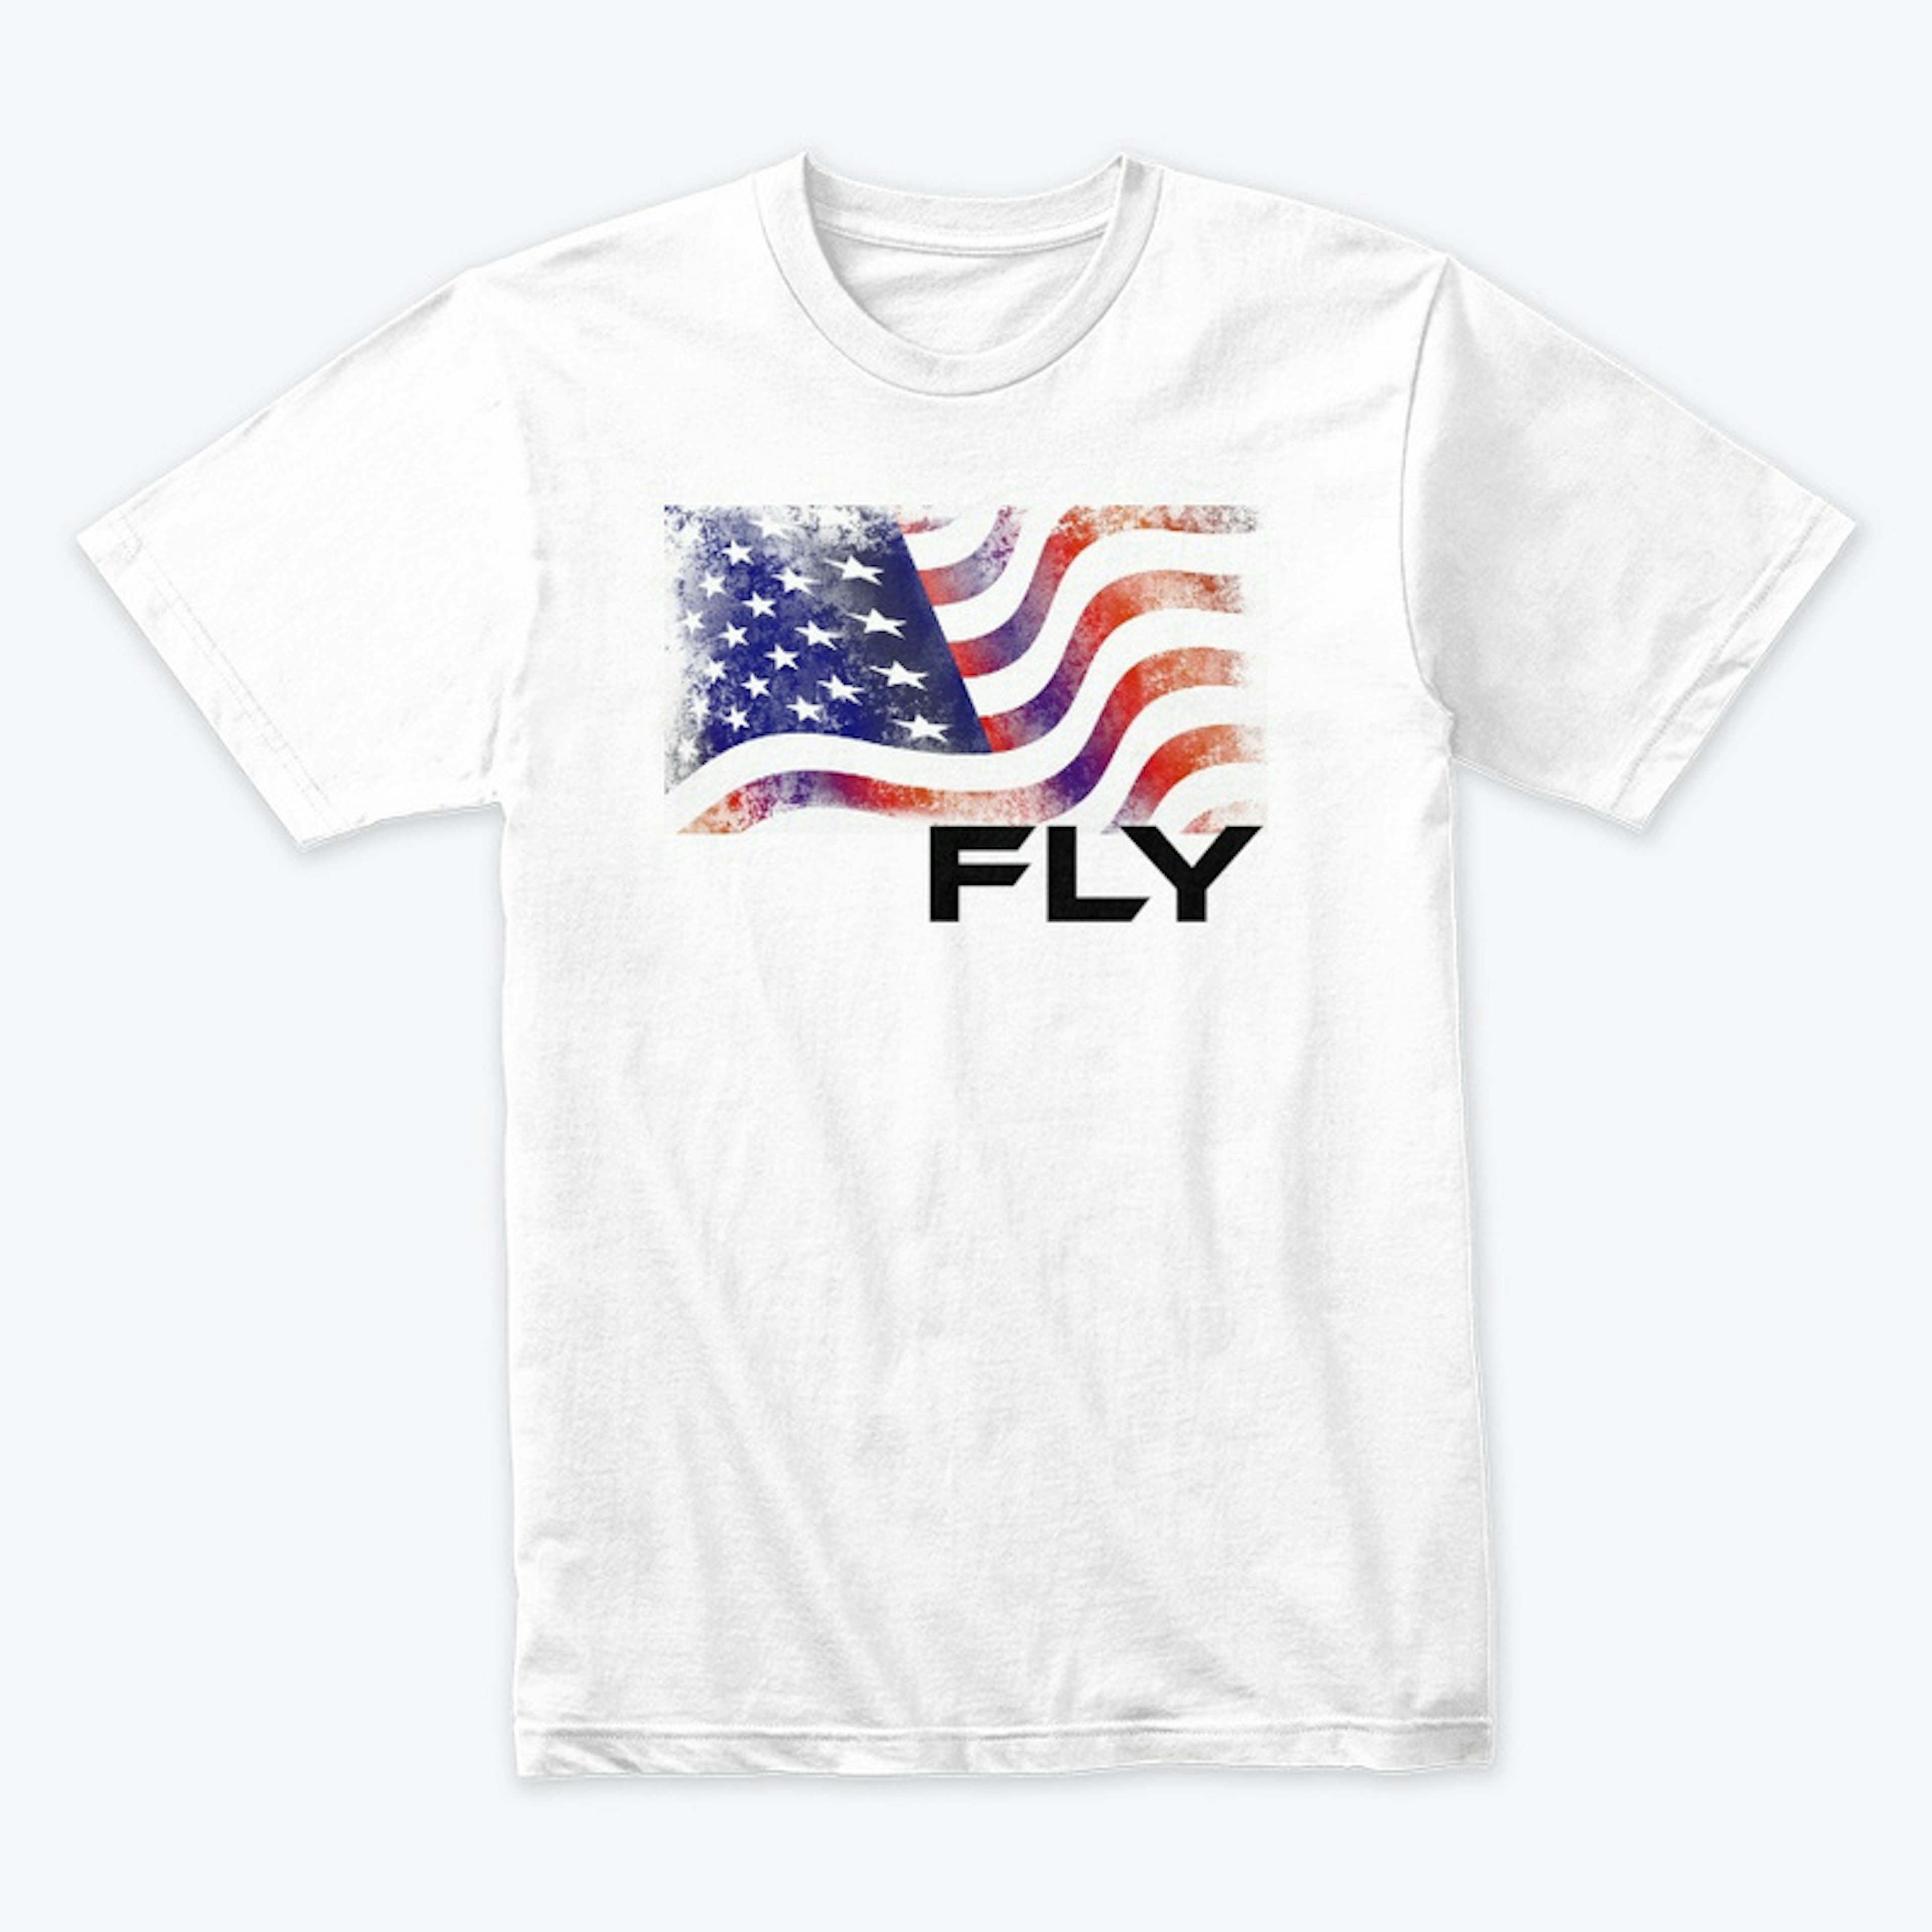 Fly in America t-shirt and sticker